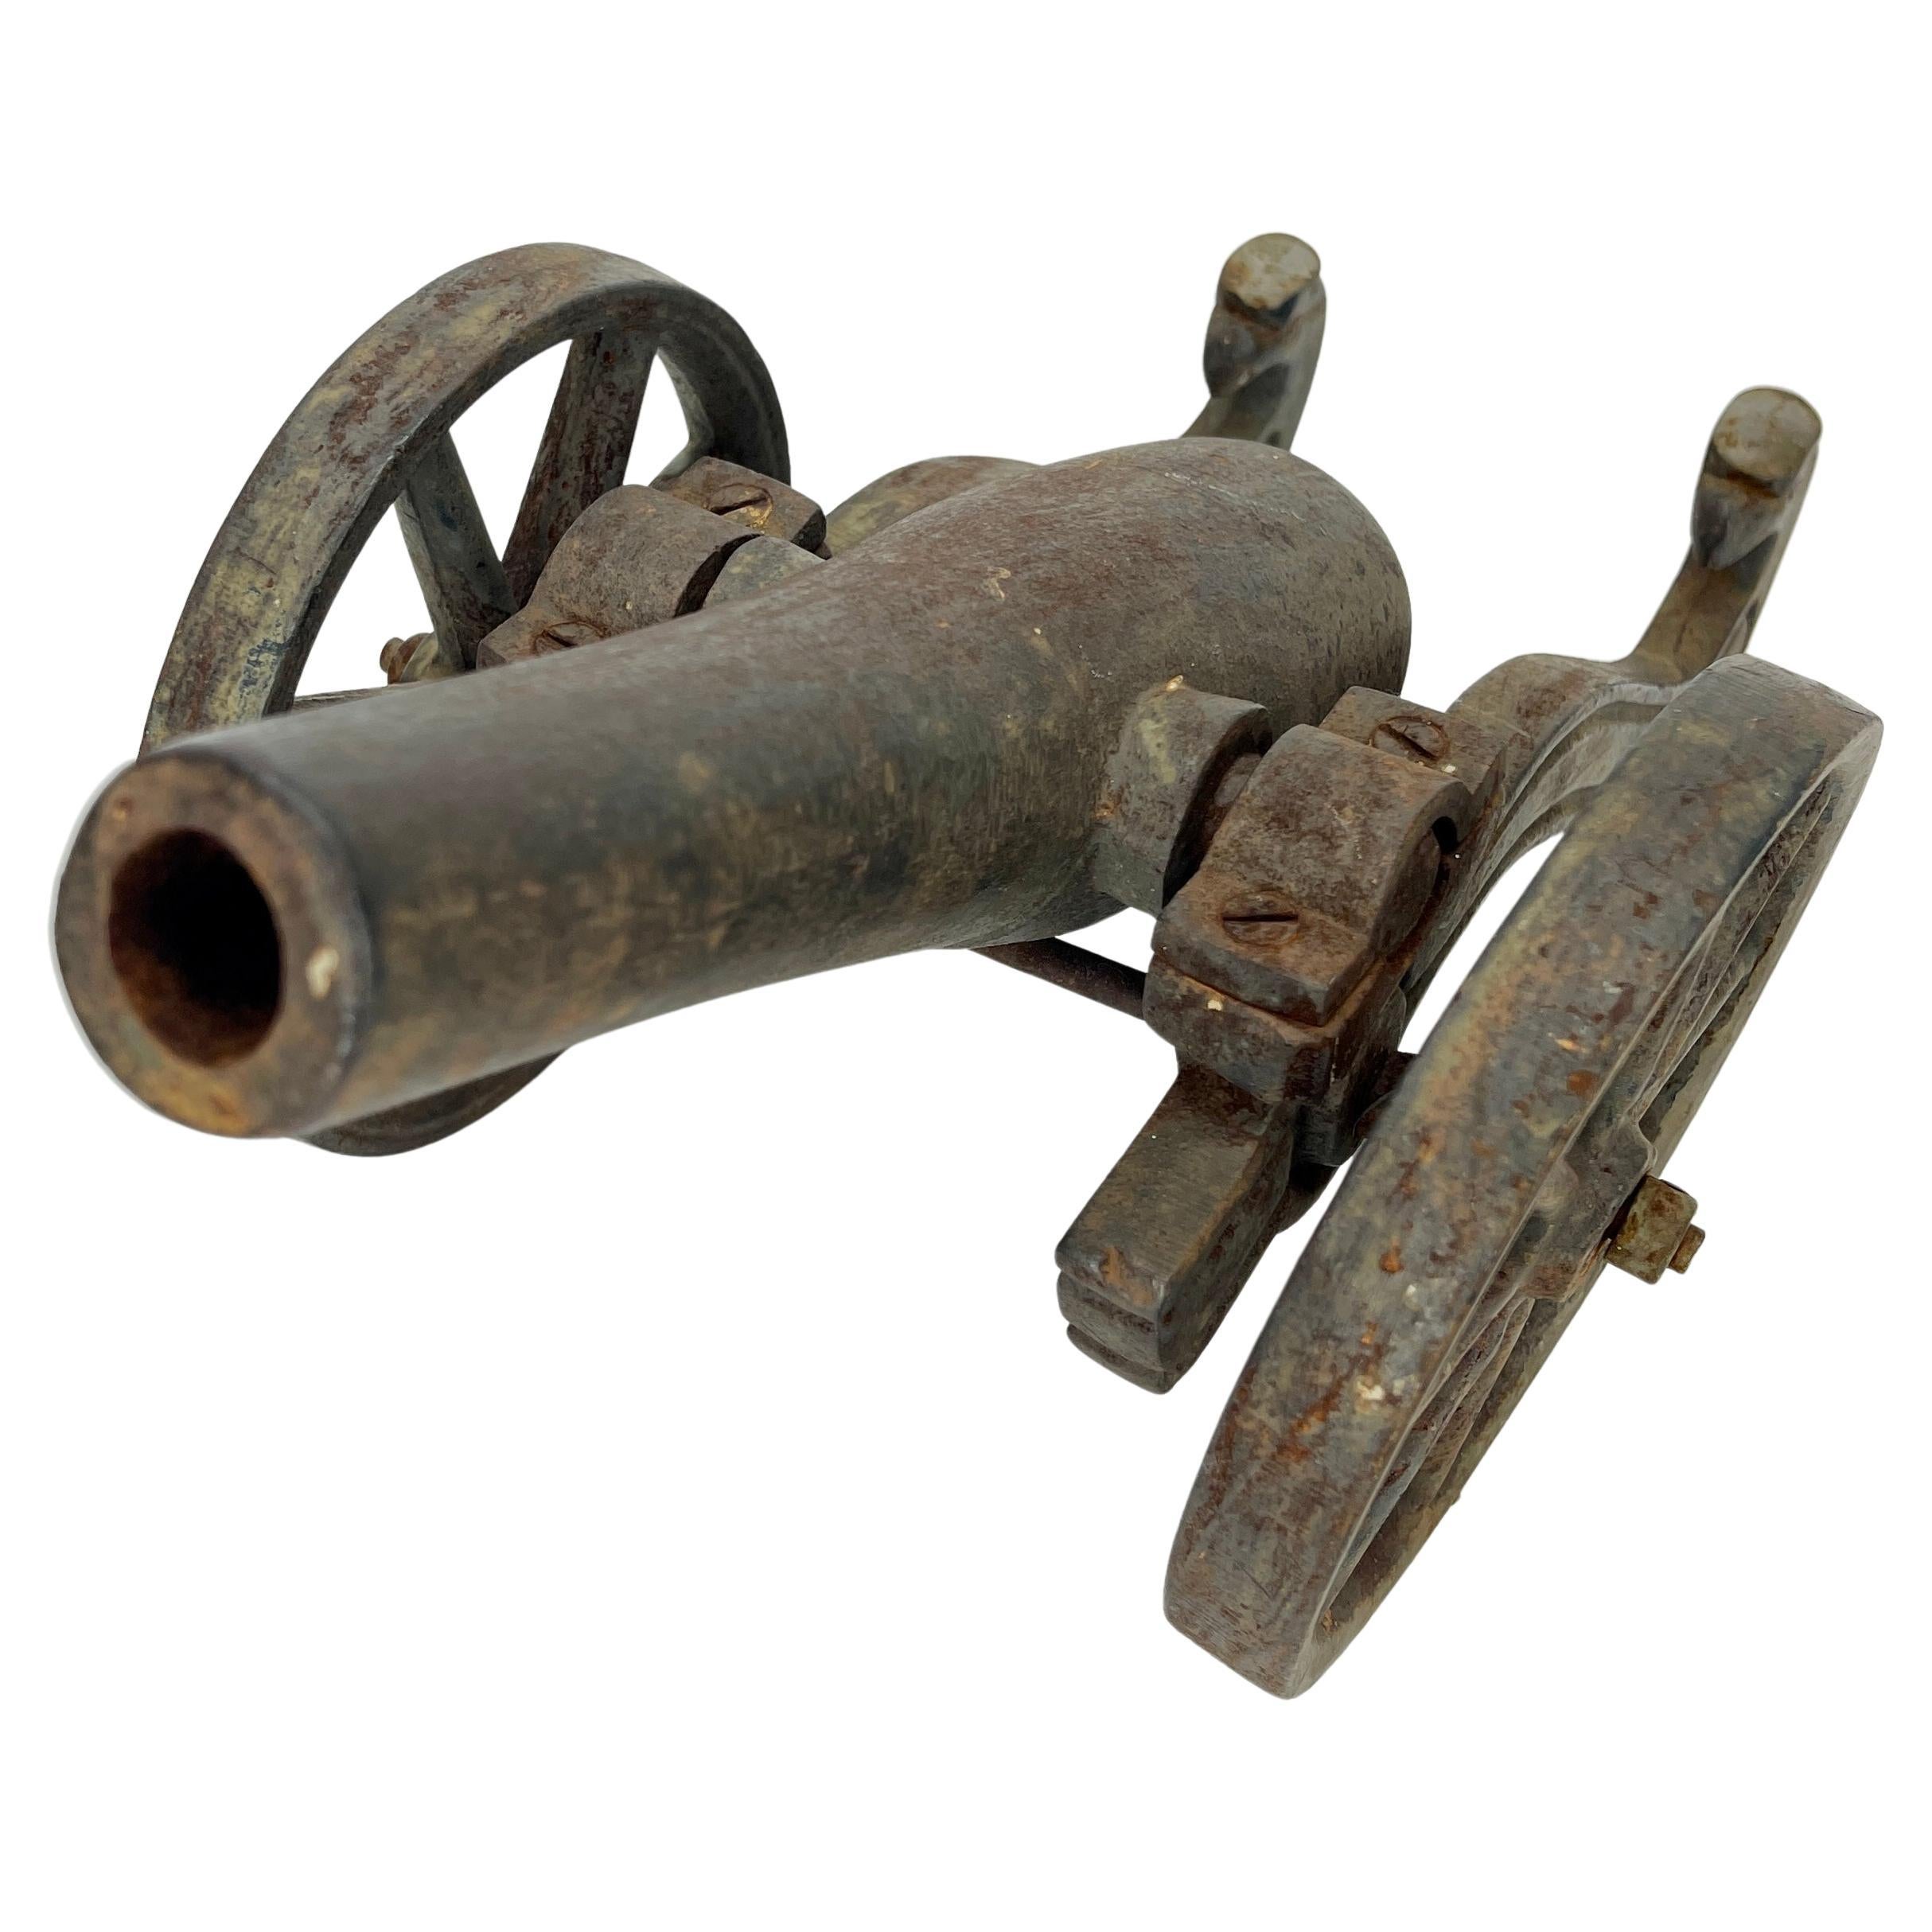 Small Early 20th Century Iron Cannon Desk Accessory with Eagle-Head Decoration For Sale 2